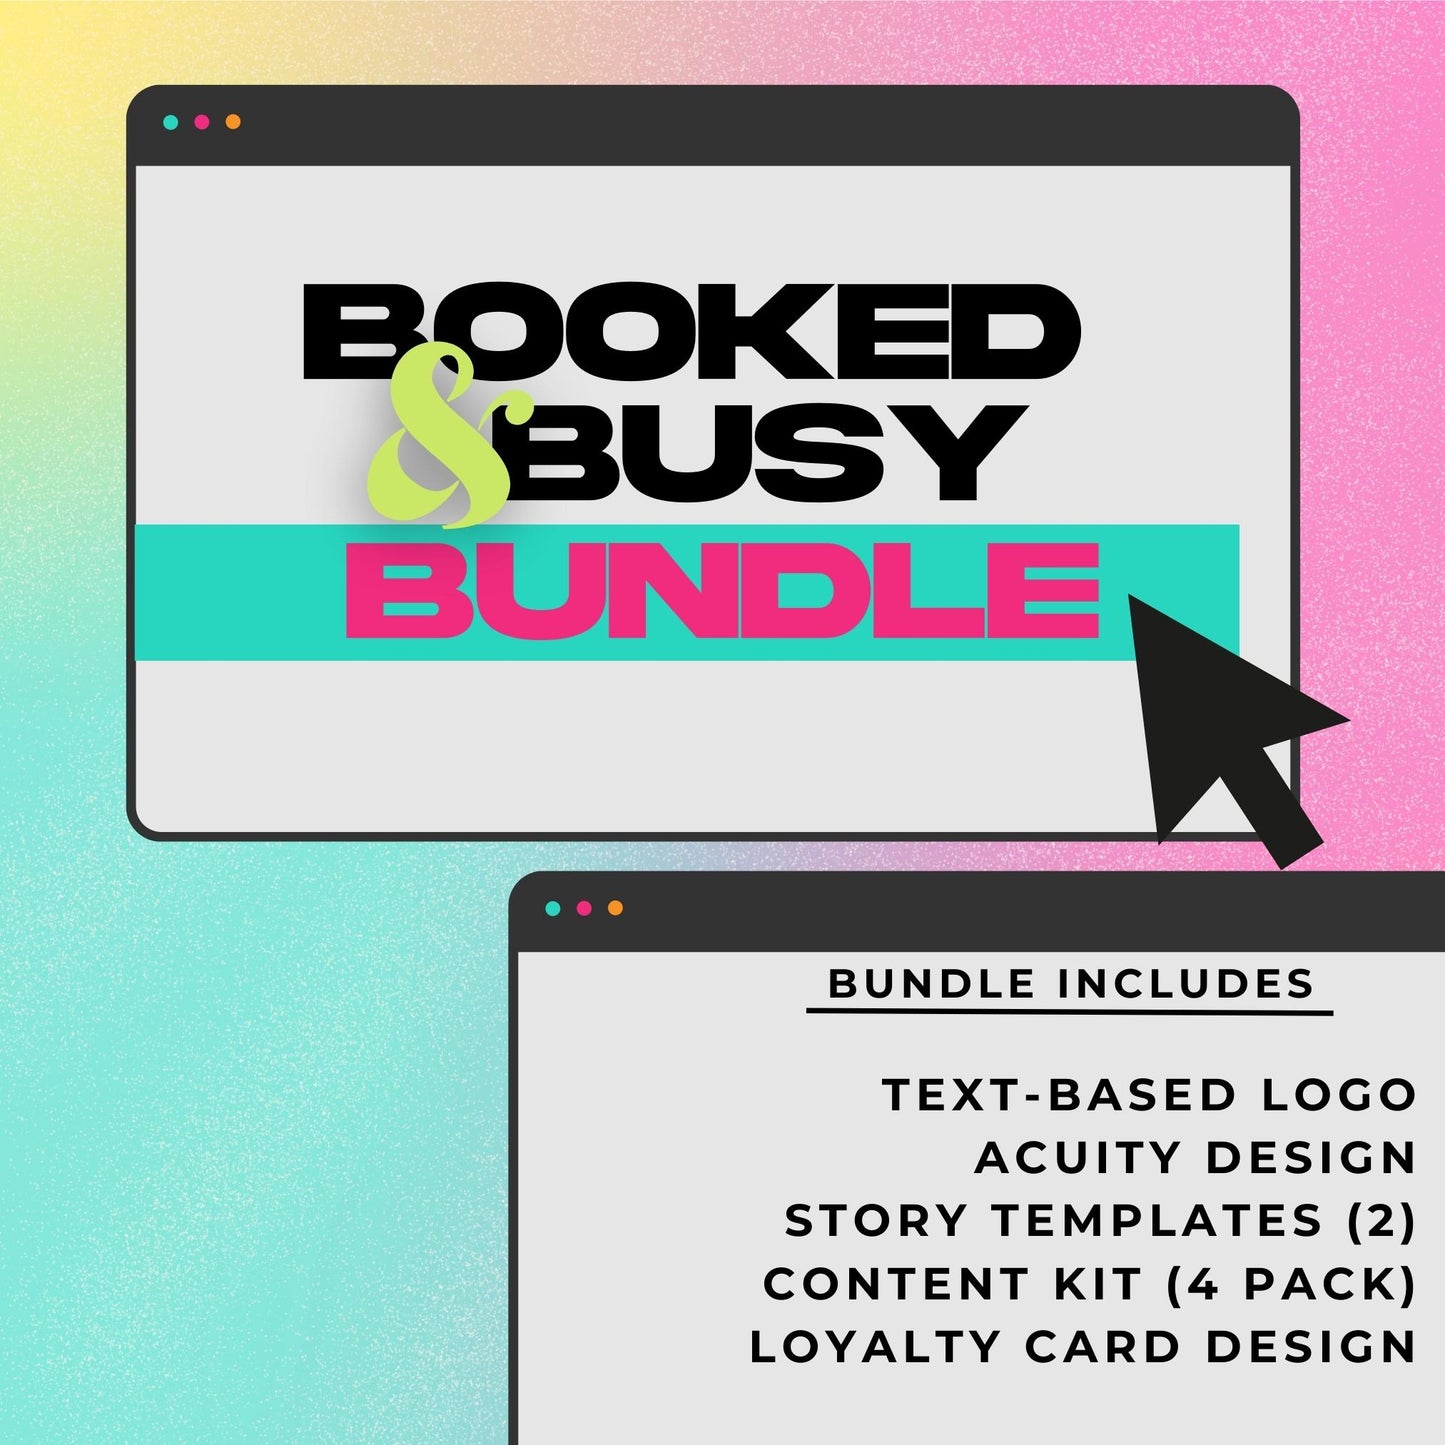 Booked & Busy Bundle